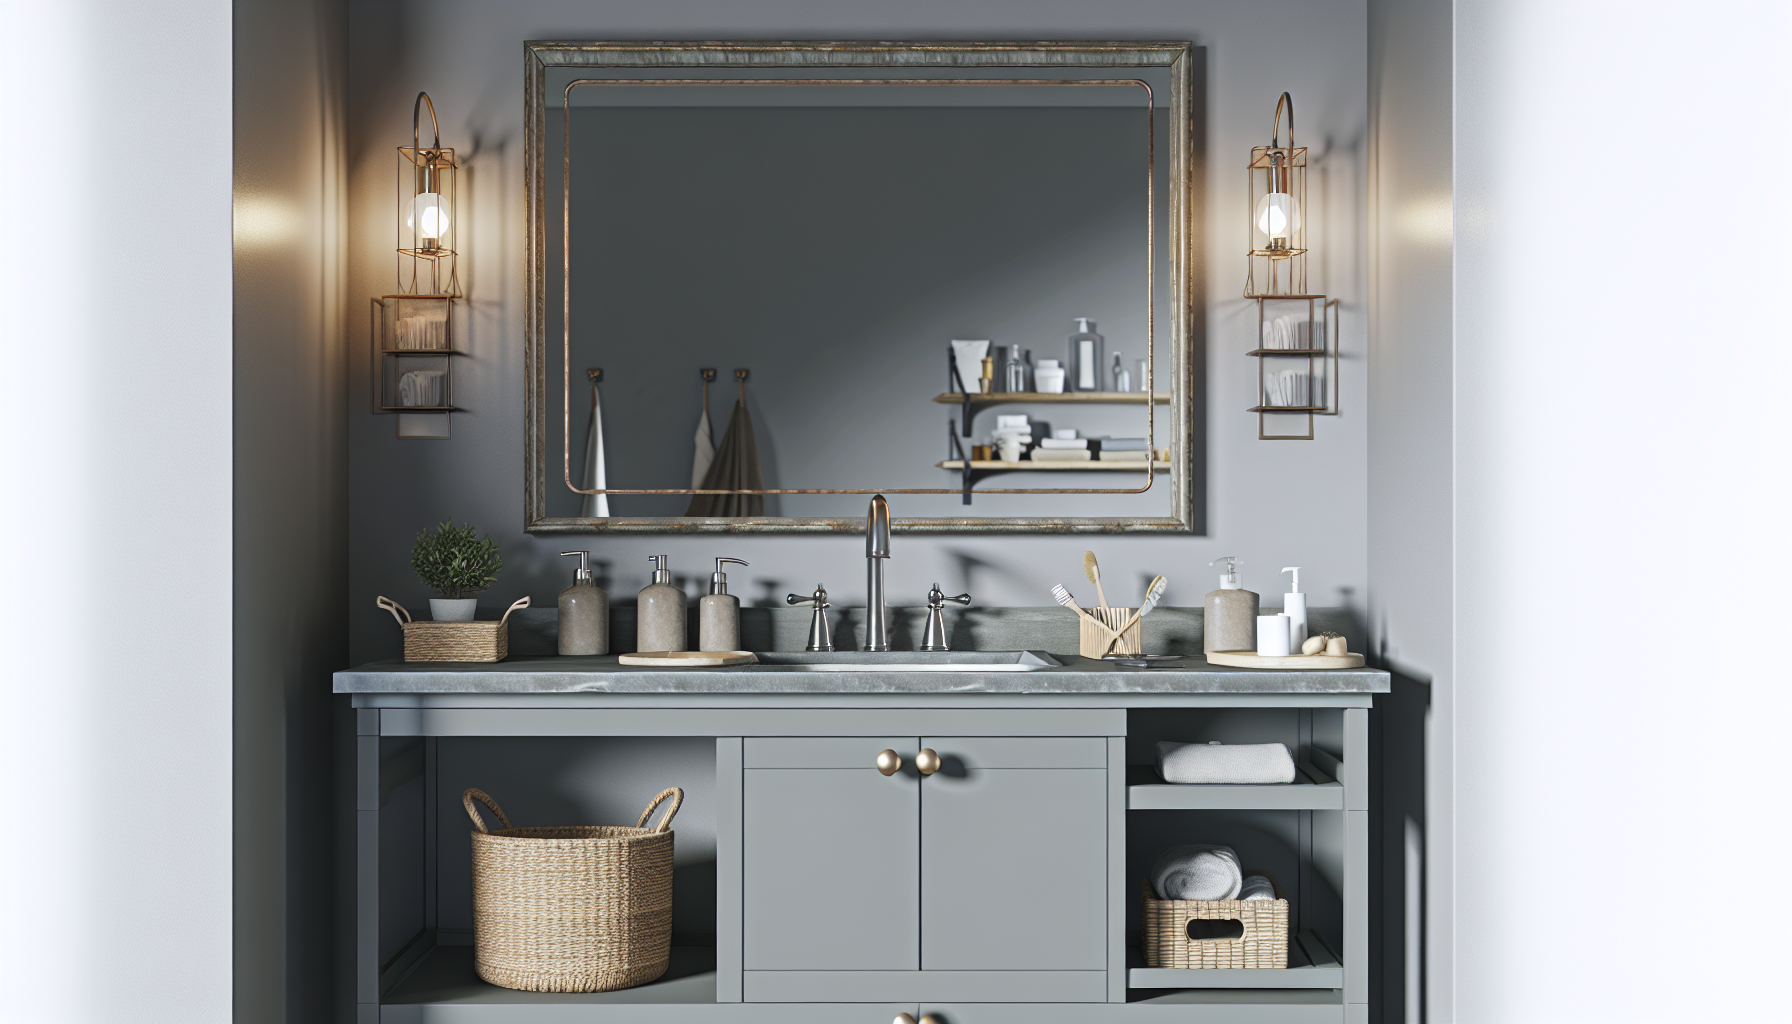 Top Picks for a Sleek Grey Bathroom Vanity: Styles & Trends for Your Home